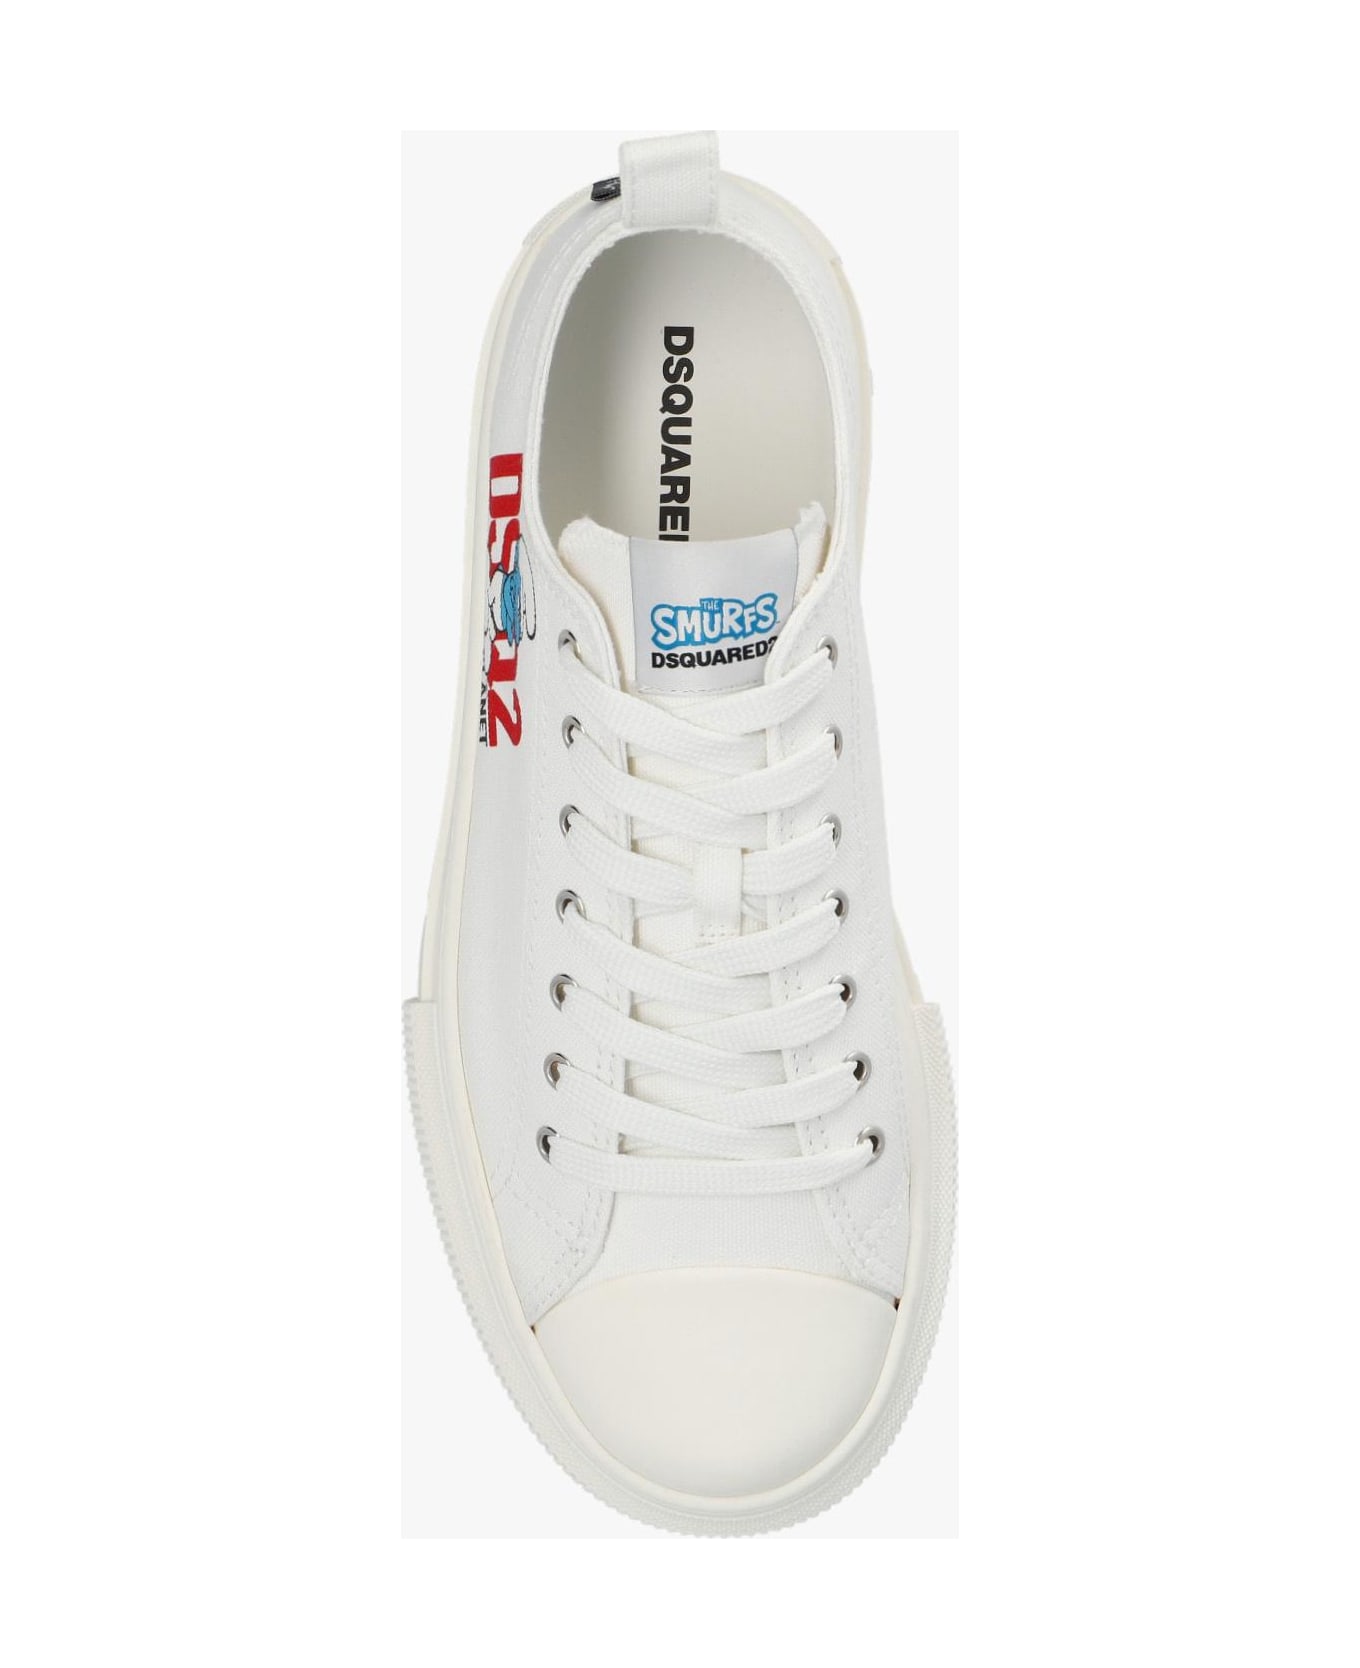 Dsquared2 X The Smurfs Berlin Sneakers - Bianco